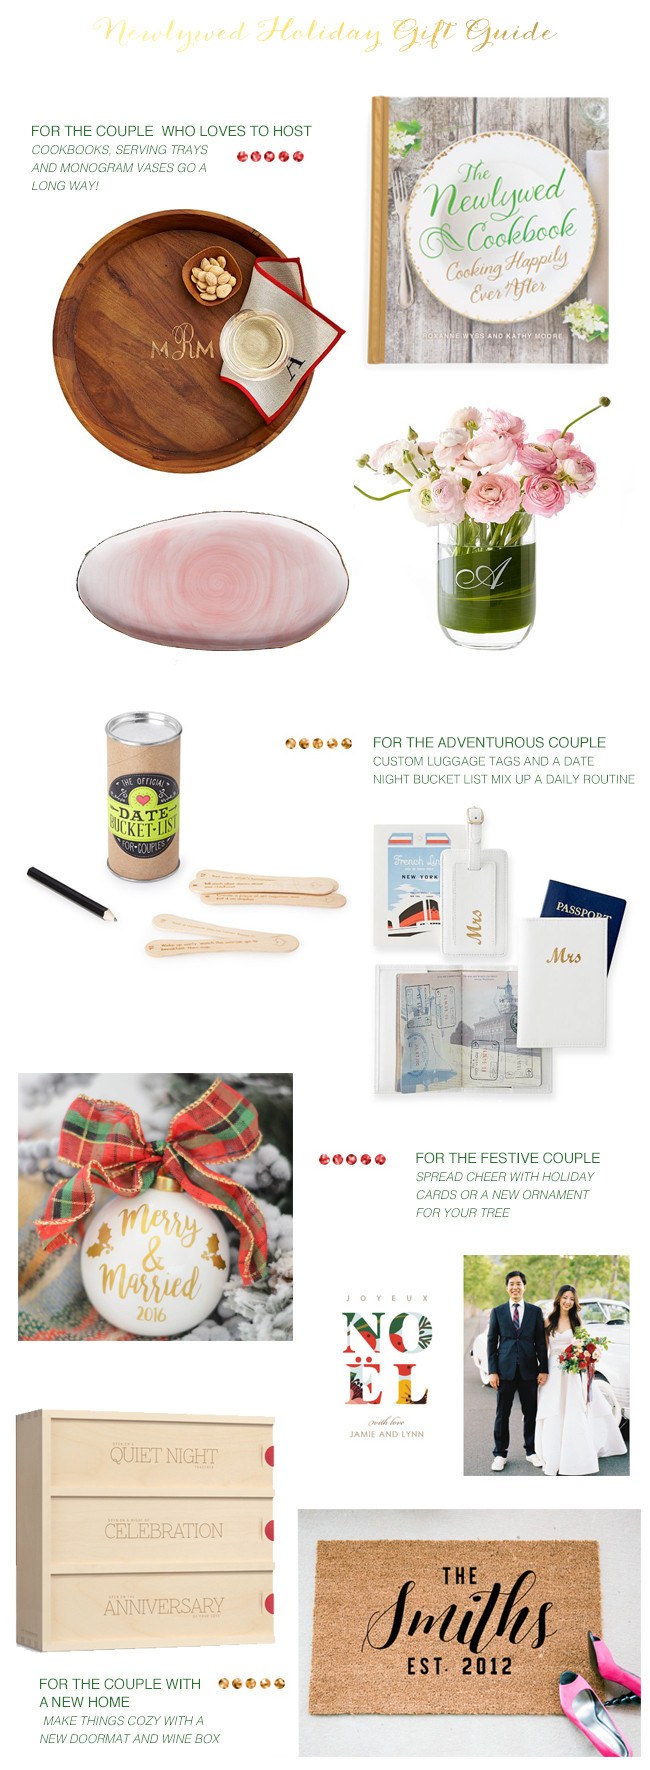 Christmas Gift Ideas For Newlyweds
 Newlywed Holiday Gift Guide